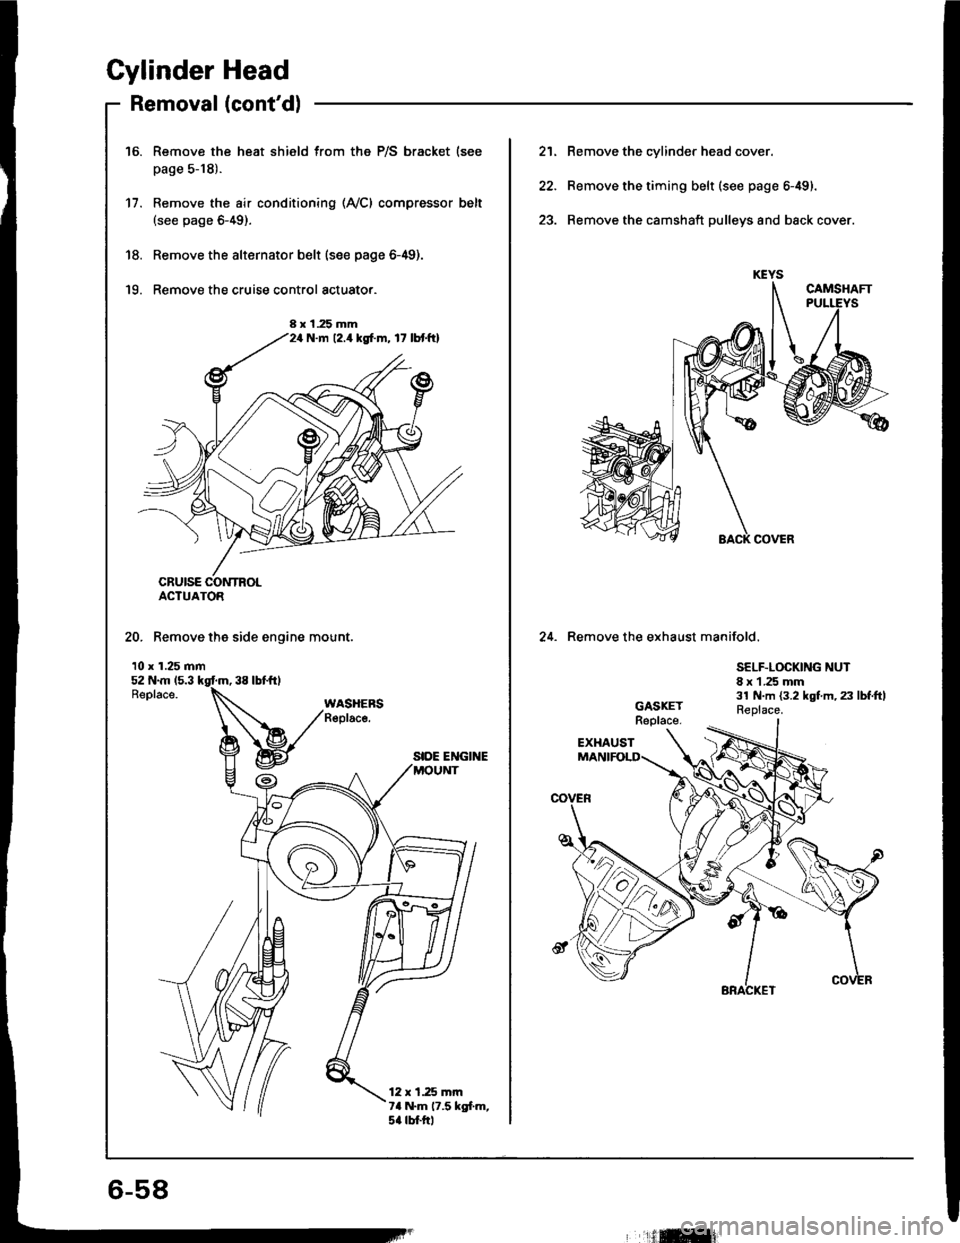 ACURA INTEGRA 1994  Service Repair Manual Cylinder Head
Removal (contdl
Remove the heat shield from the P/S bracket (see
page 5-18).
Remove the air conditioning (AyCl compressor belt(see page 6-49).
Remove the alternator belt {s€e page 6-